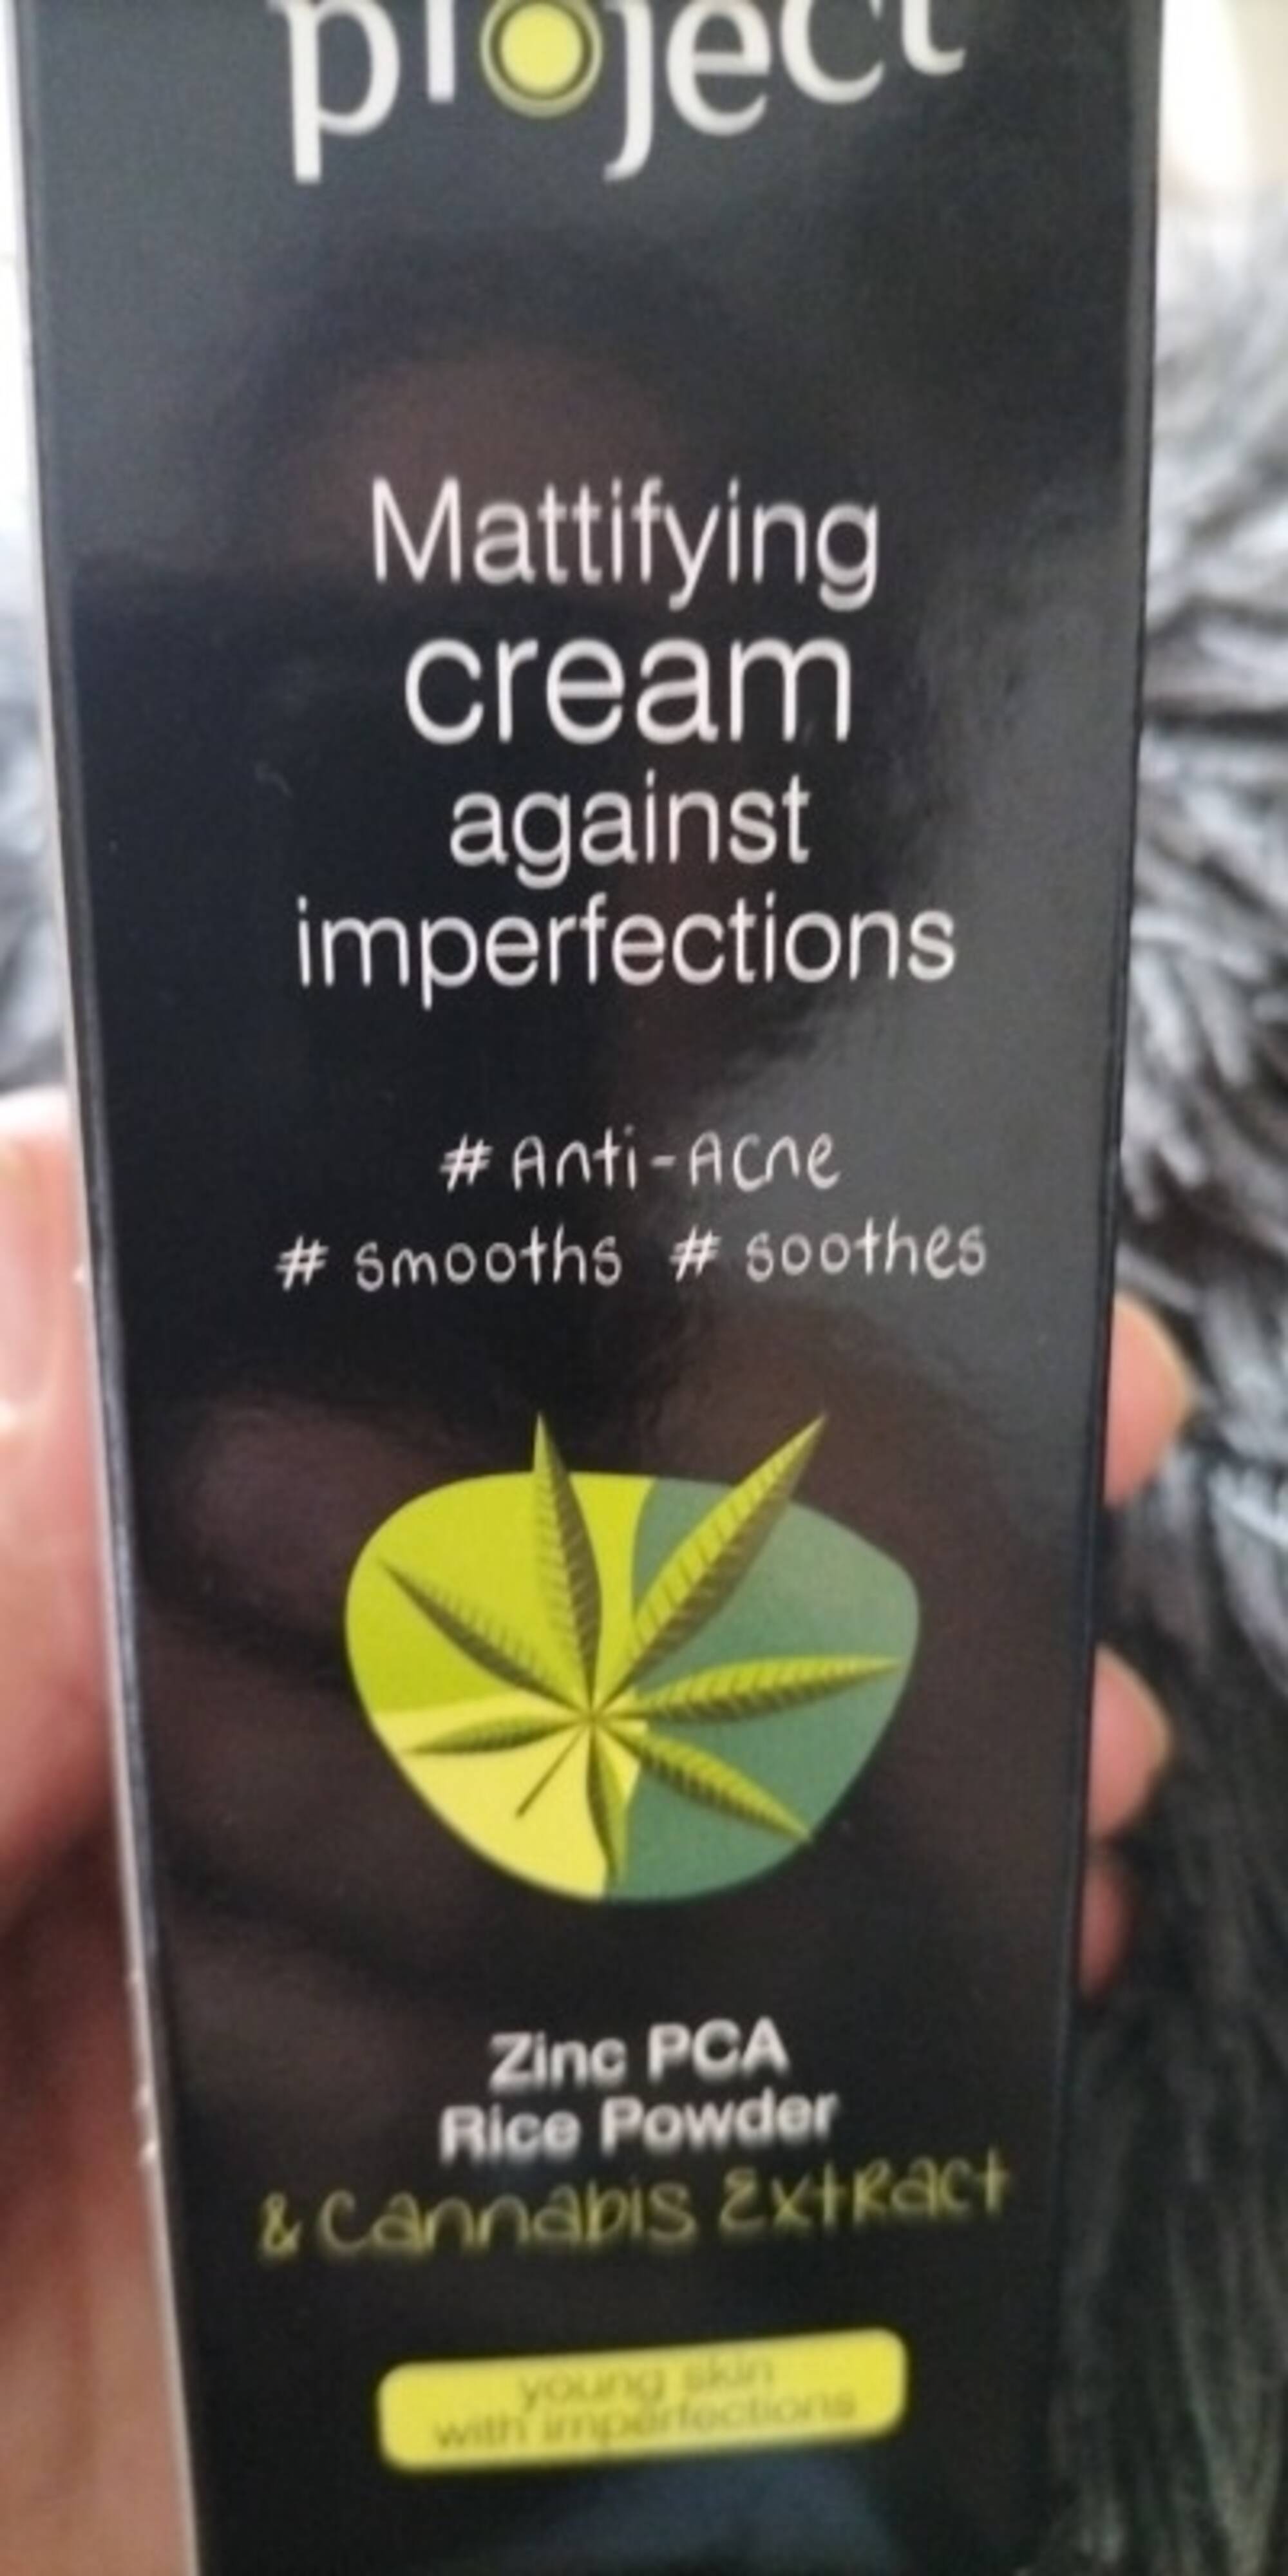 SELFIE PROJECT - Mattifying cream against imperfections